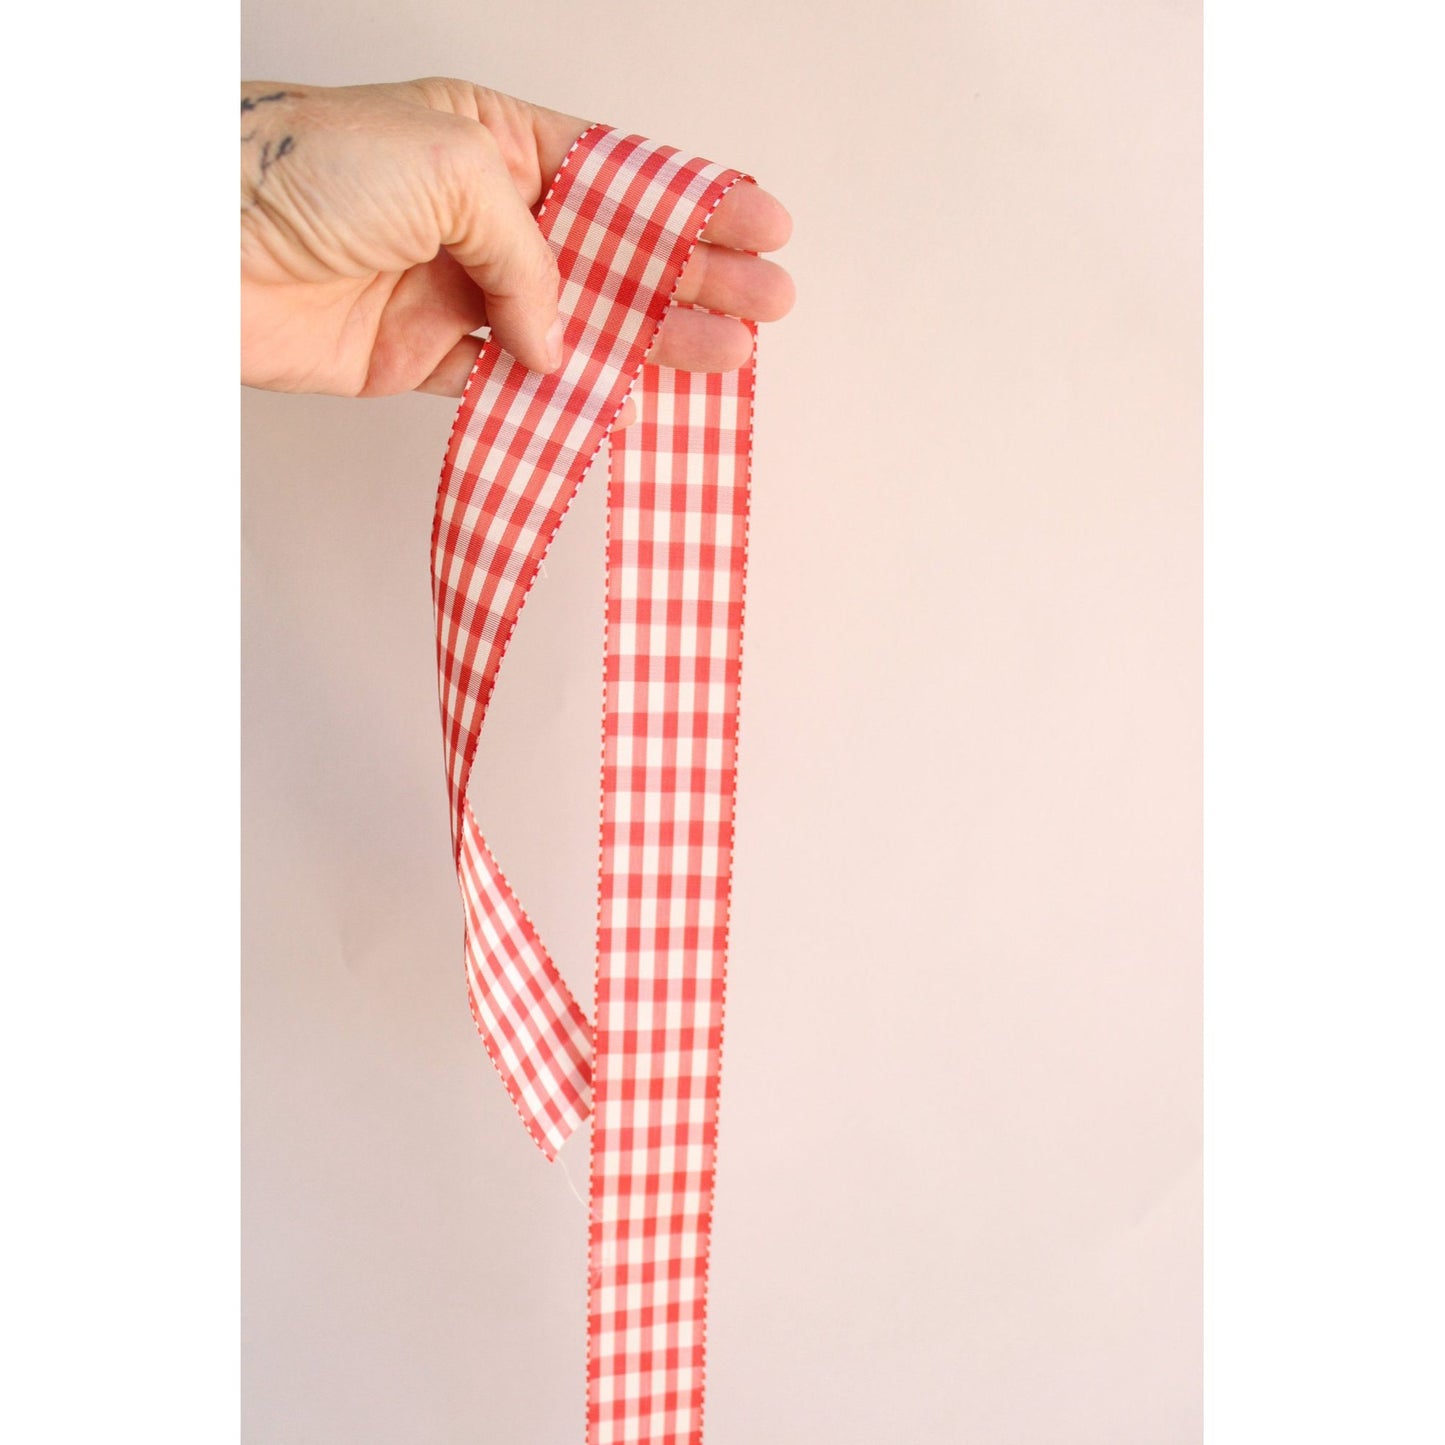 Vintage Red and White Gingham Ribbon Trim 1.5", 2 Yards